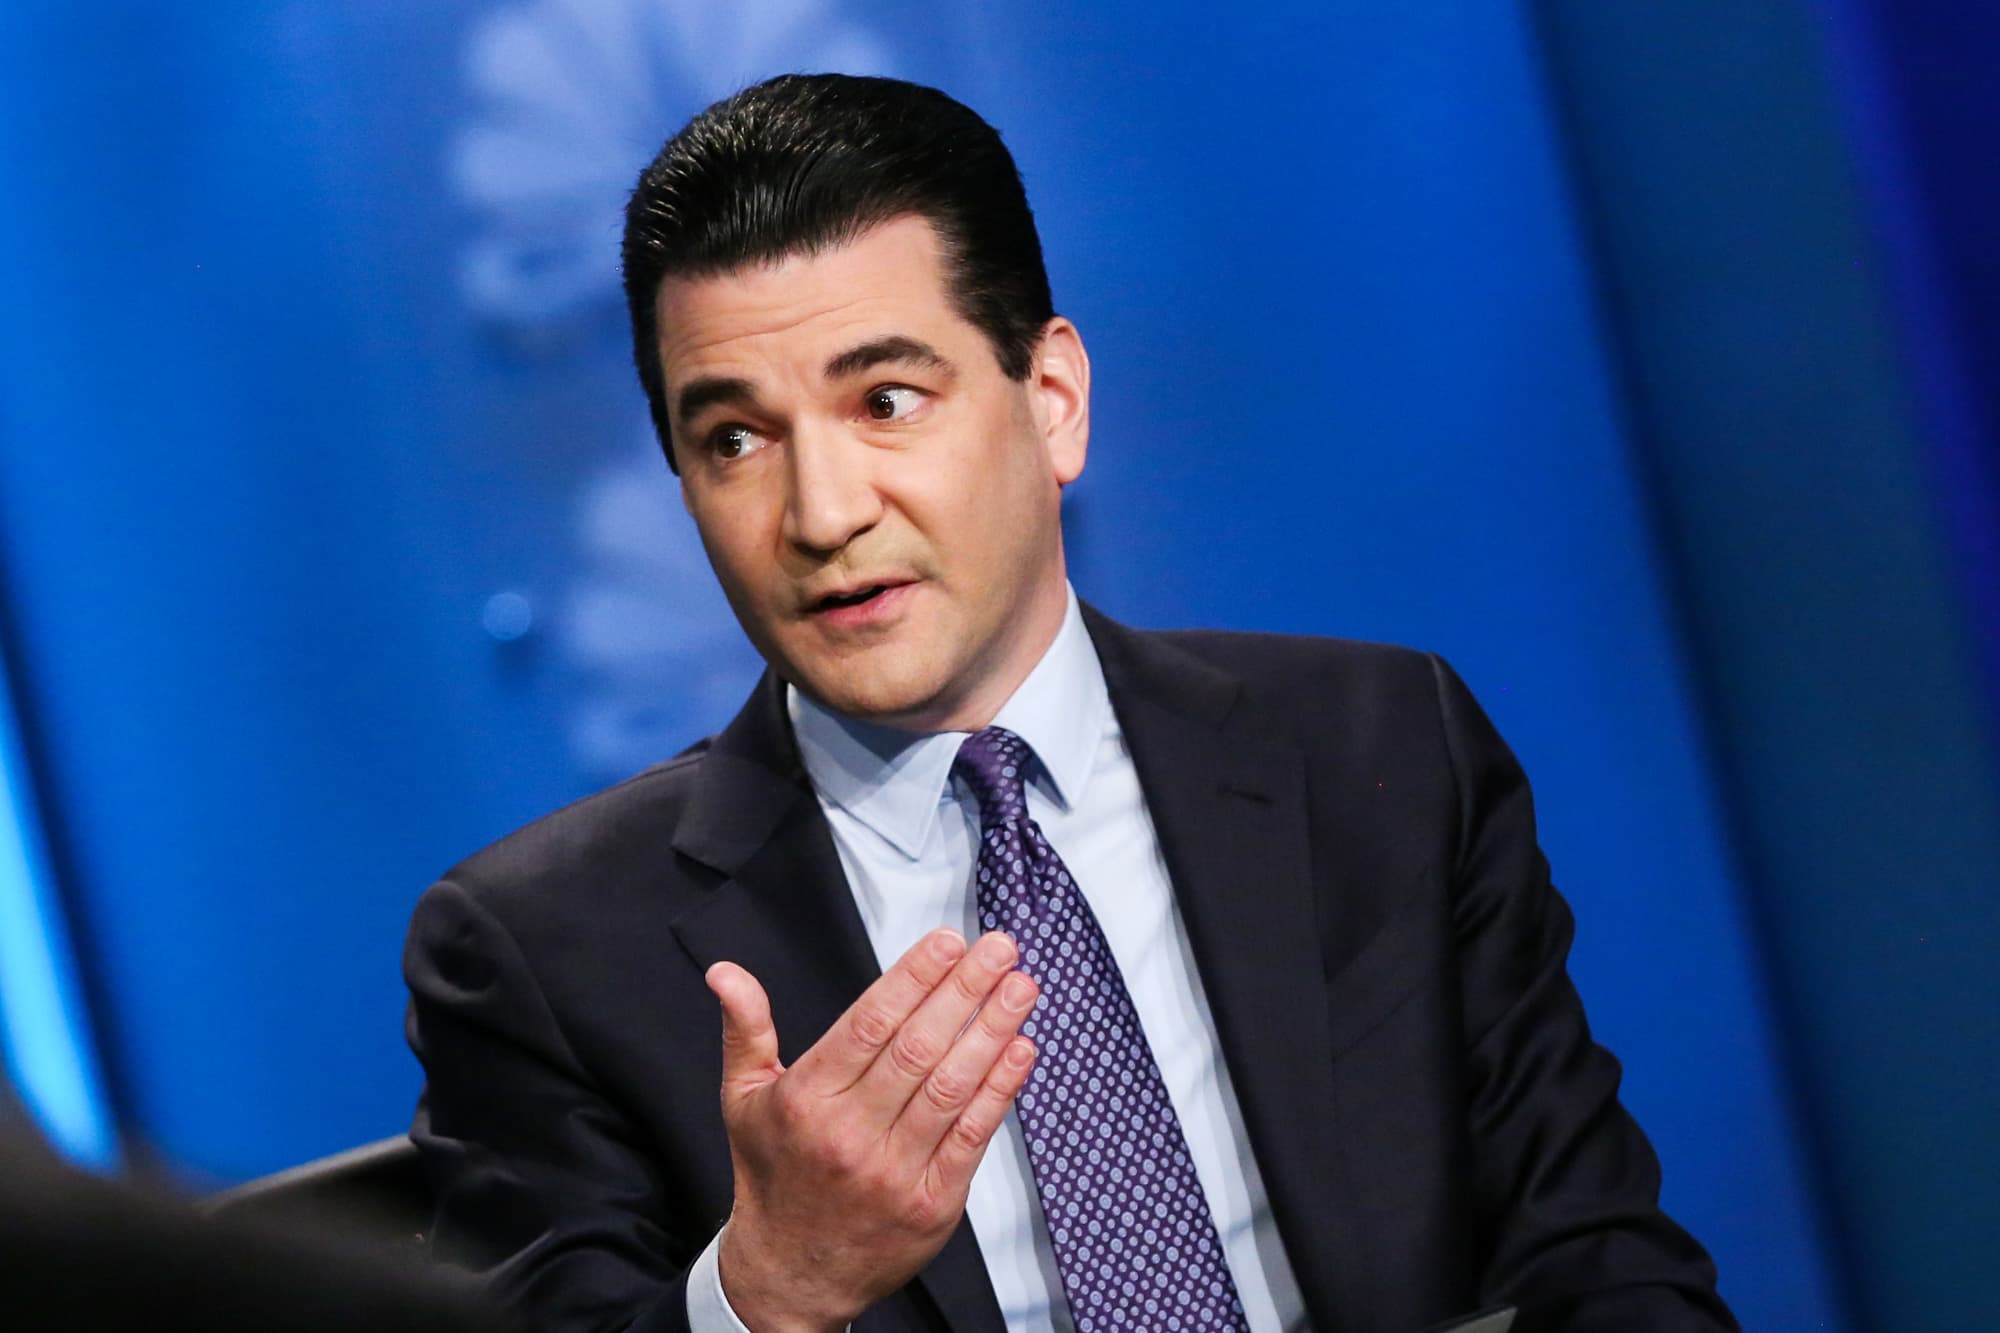 Dr. Scott Gottlieb says he’ll get his young kids vaccinated against Covid